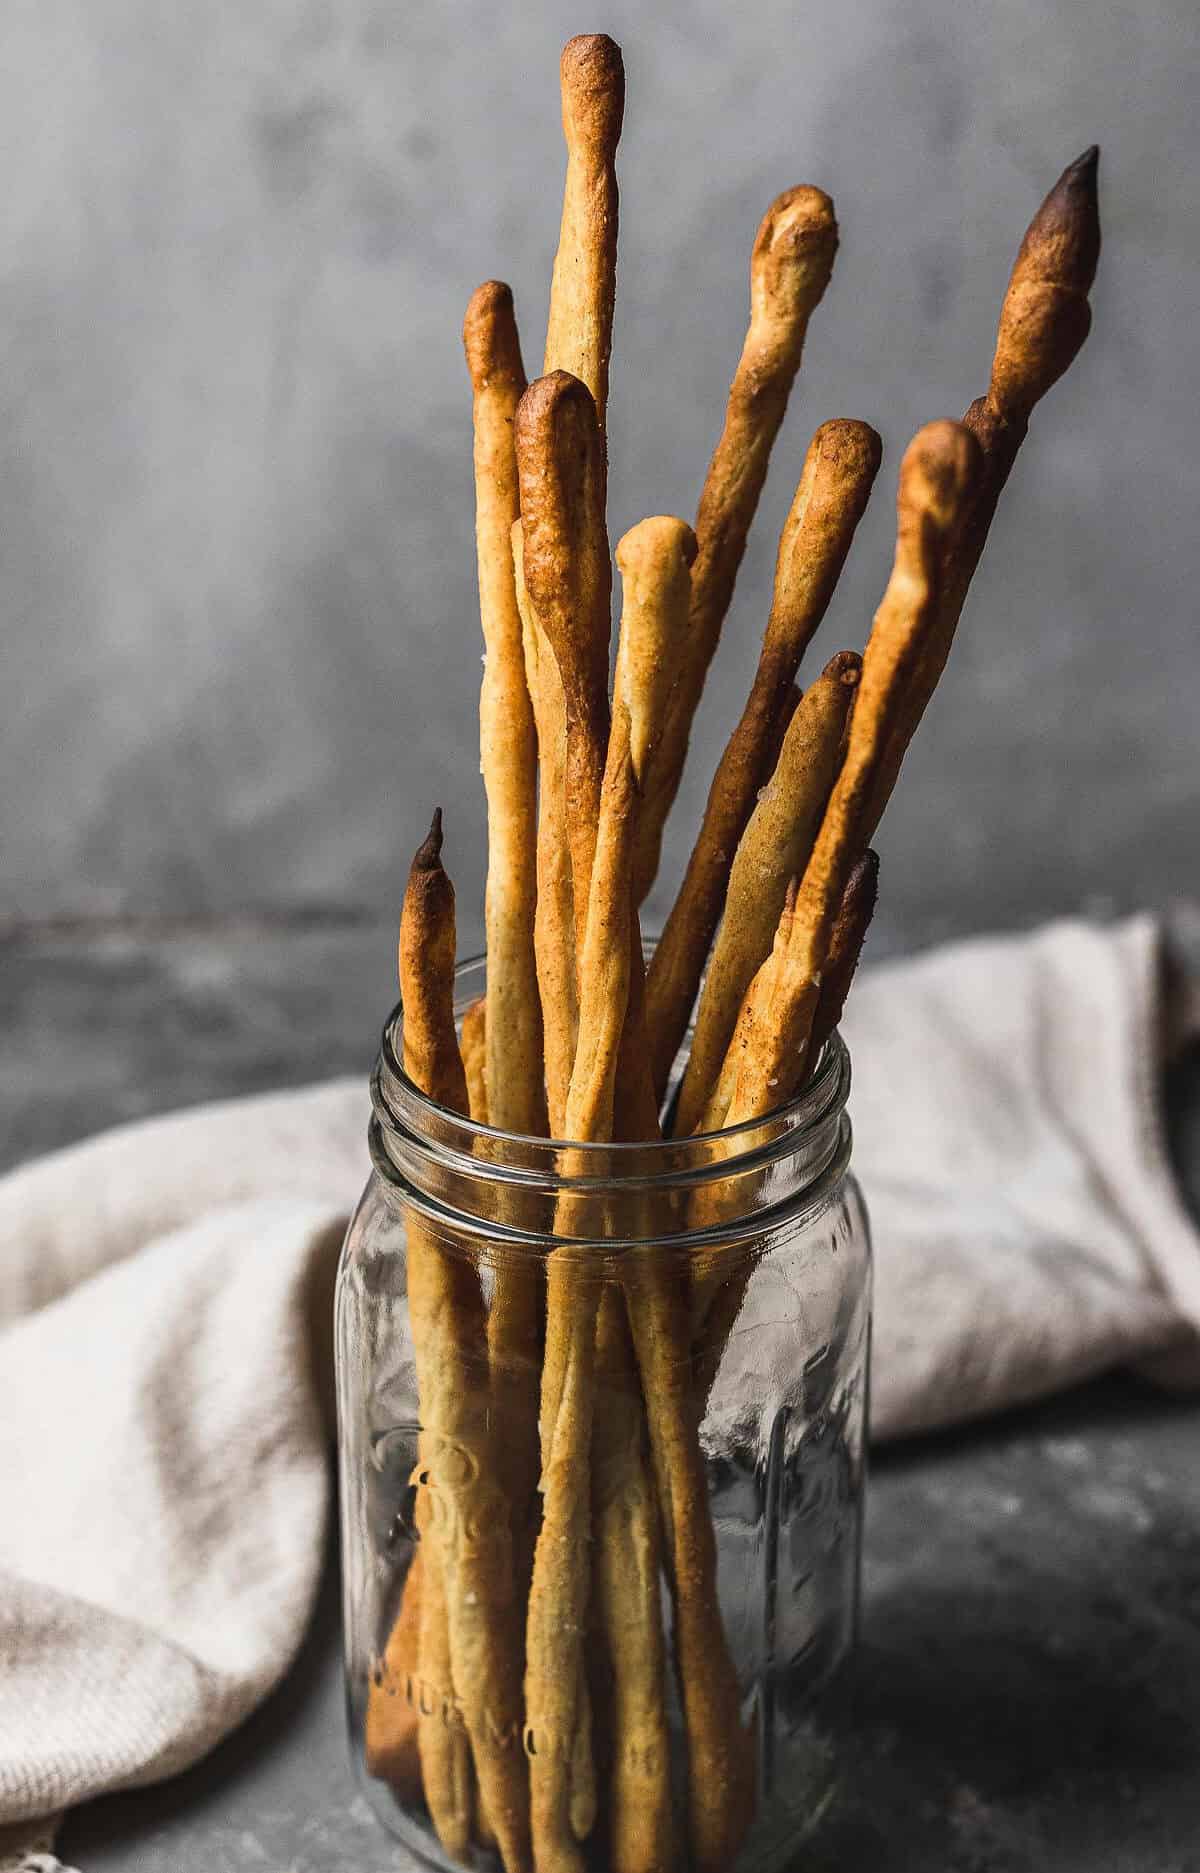  There's nothing quite like the crisp bite of a freshly-baked sourdough breadstick.